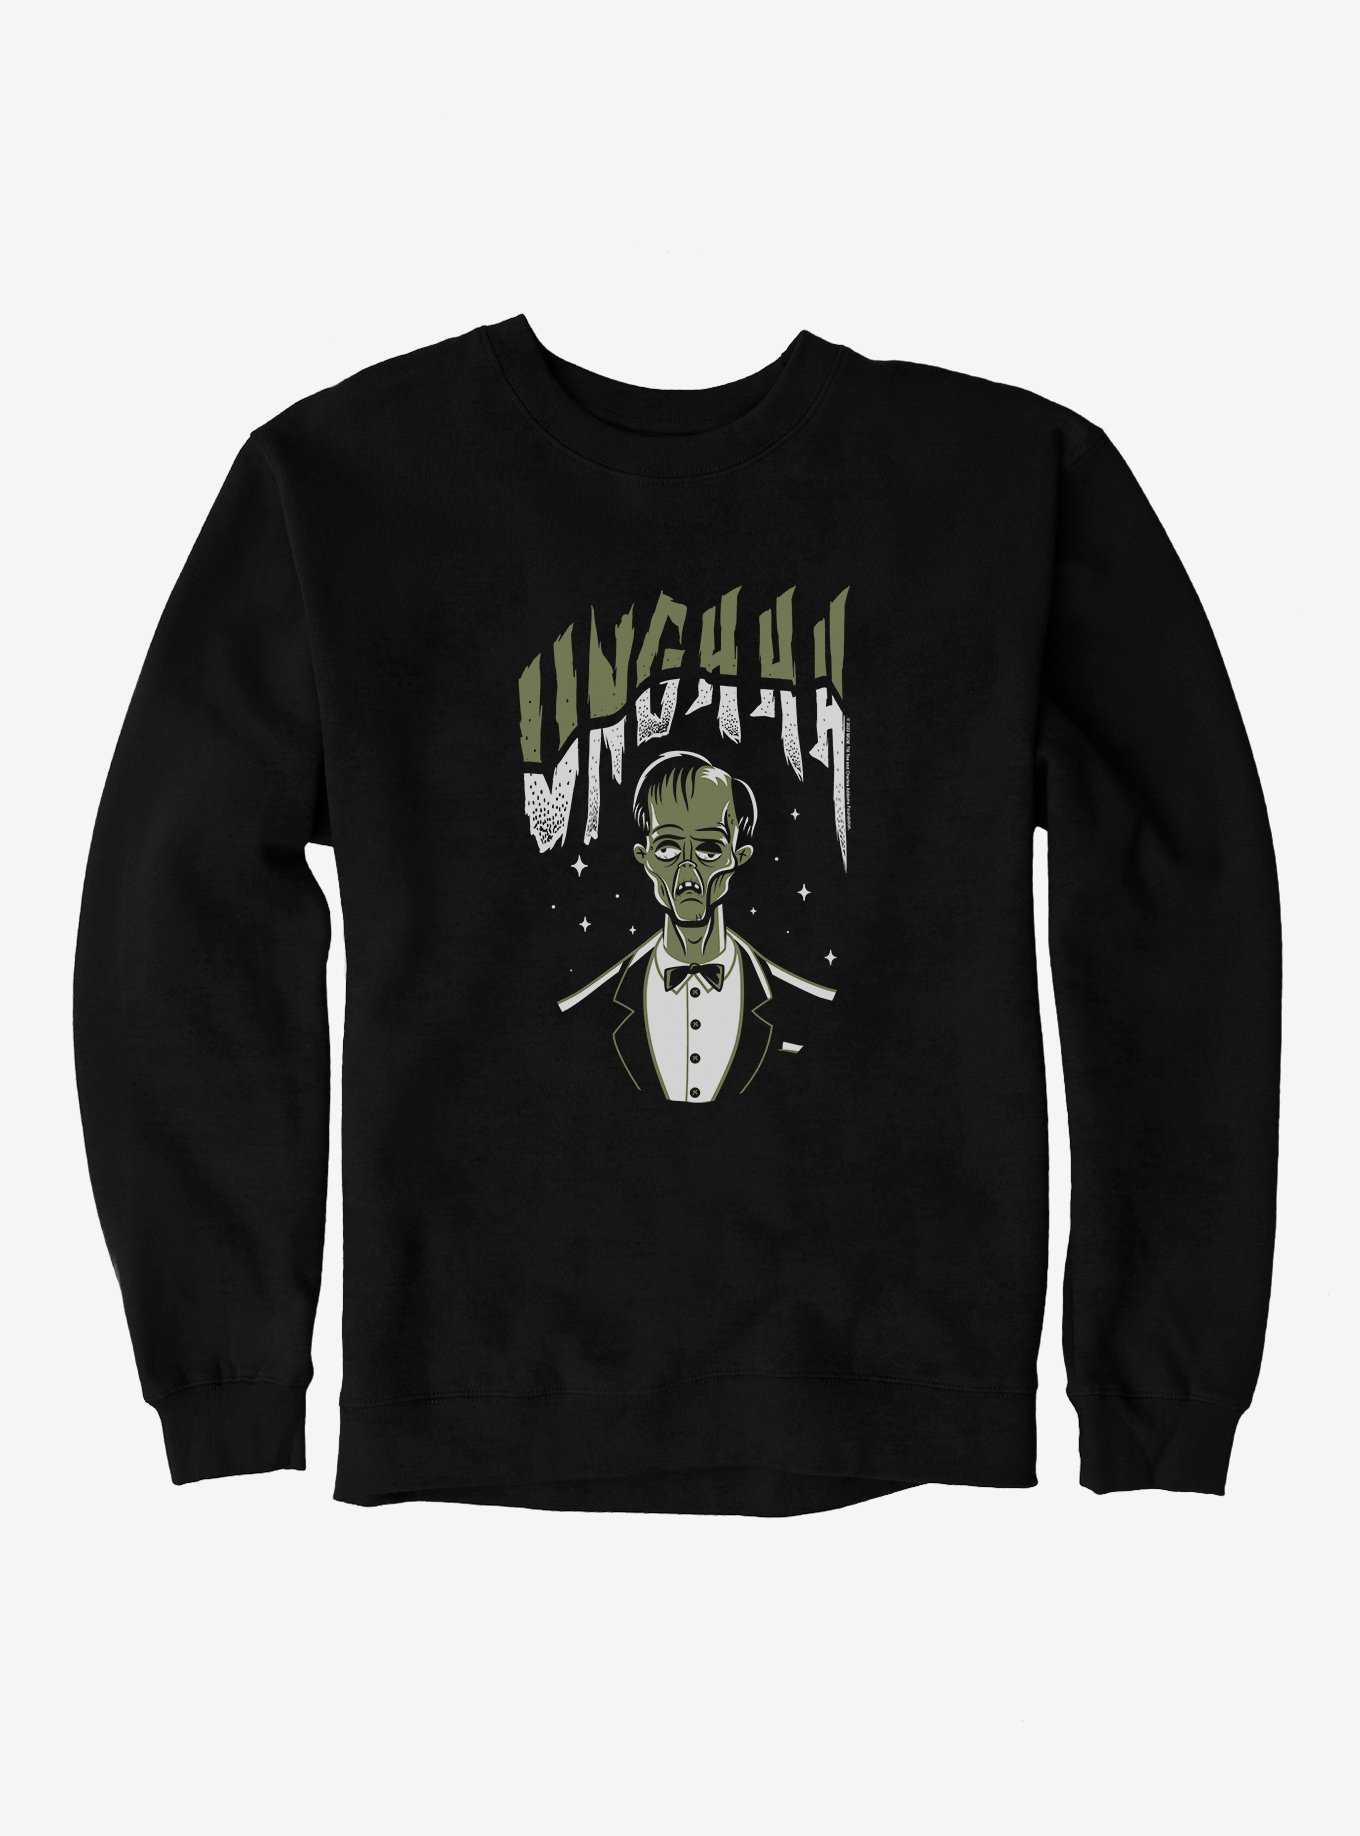 The Addams Family Caricature Lurch Unghhh Sweatshirt, , hi-res